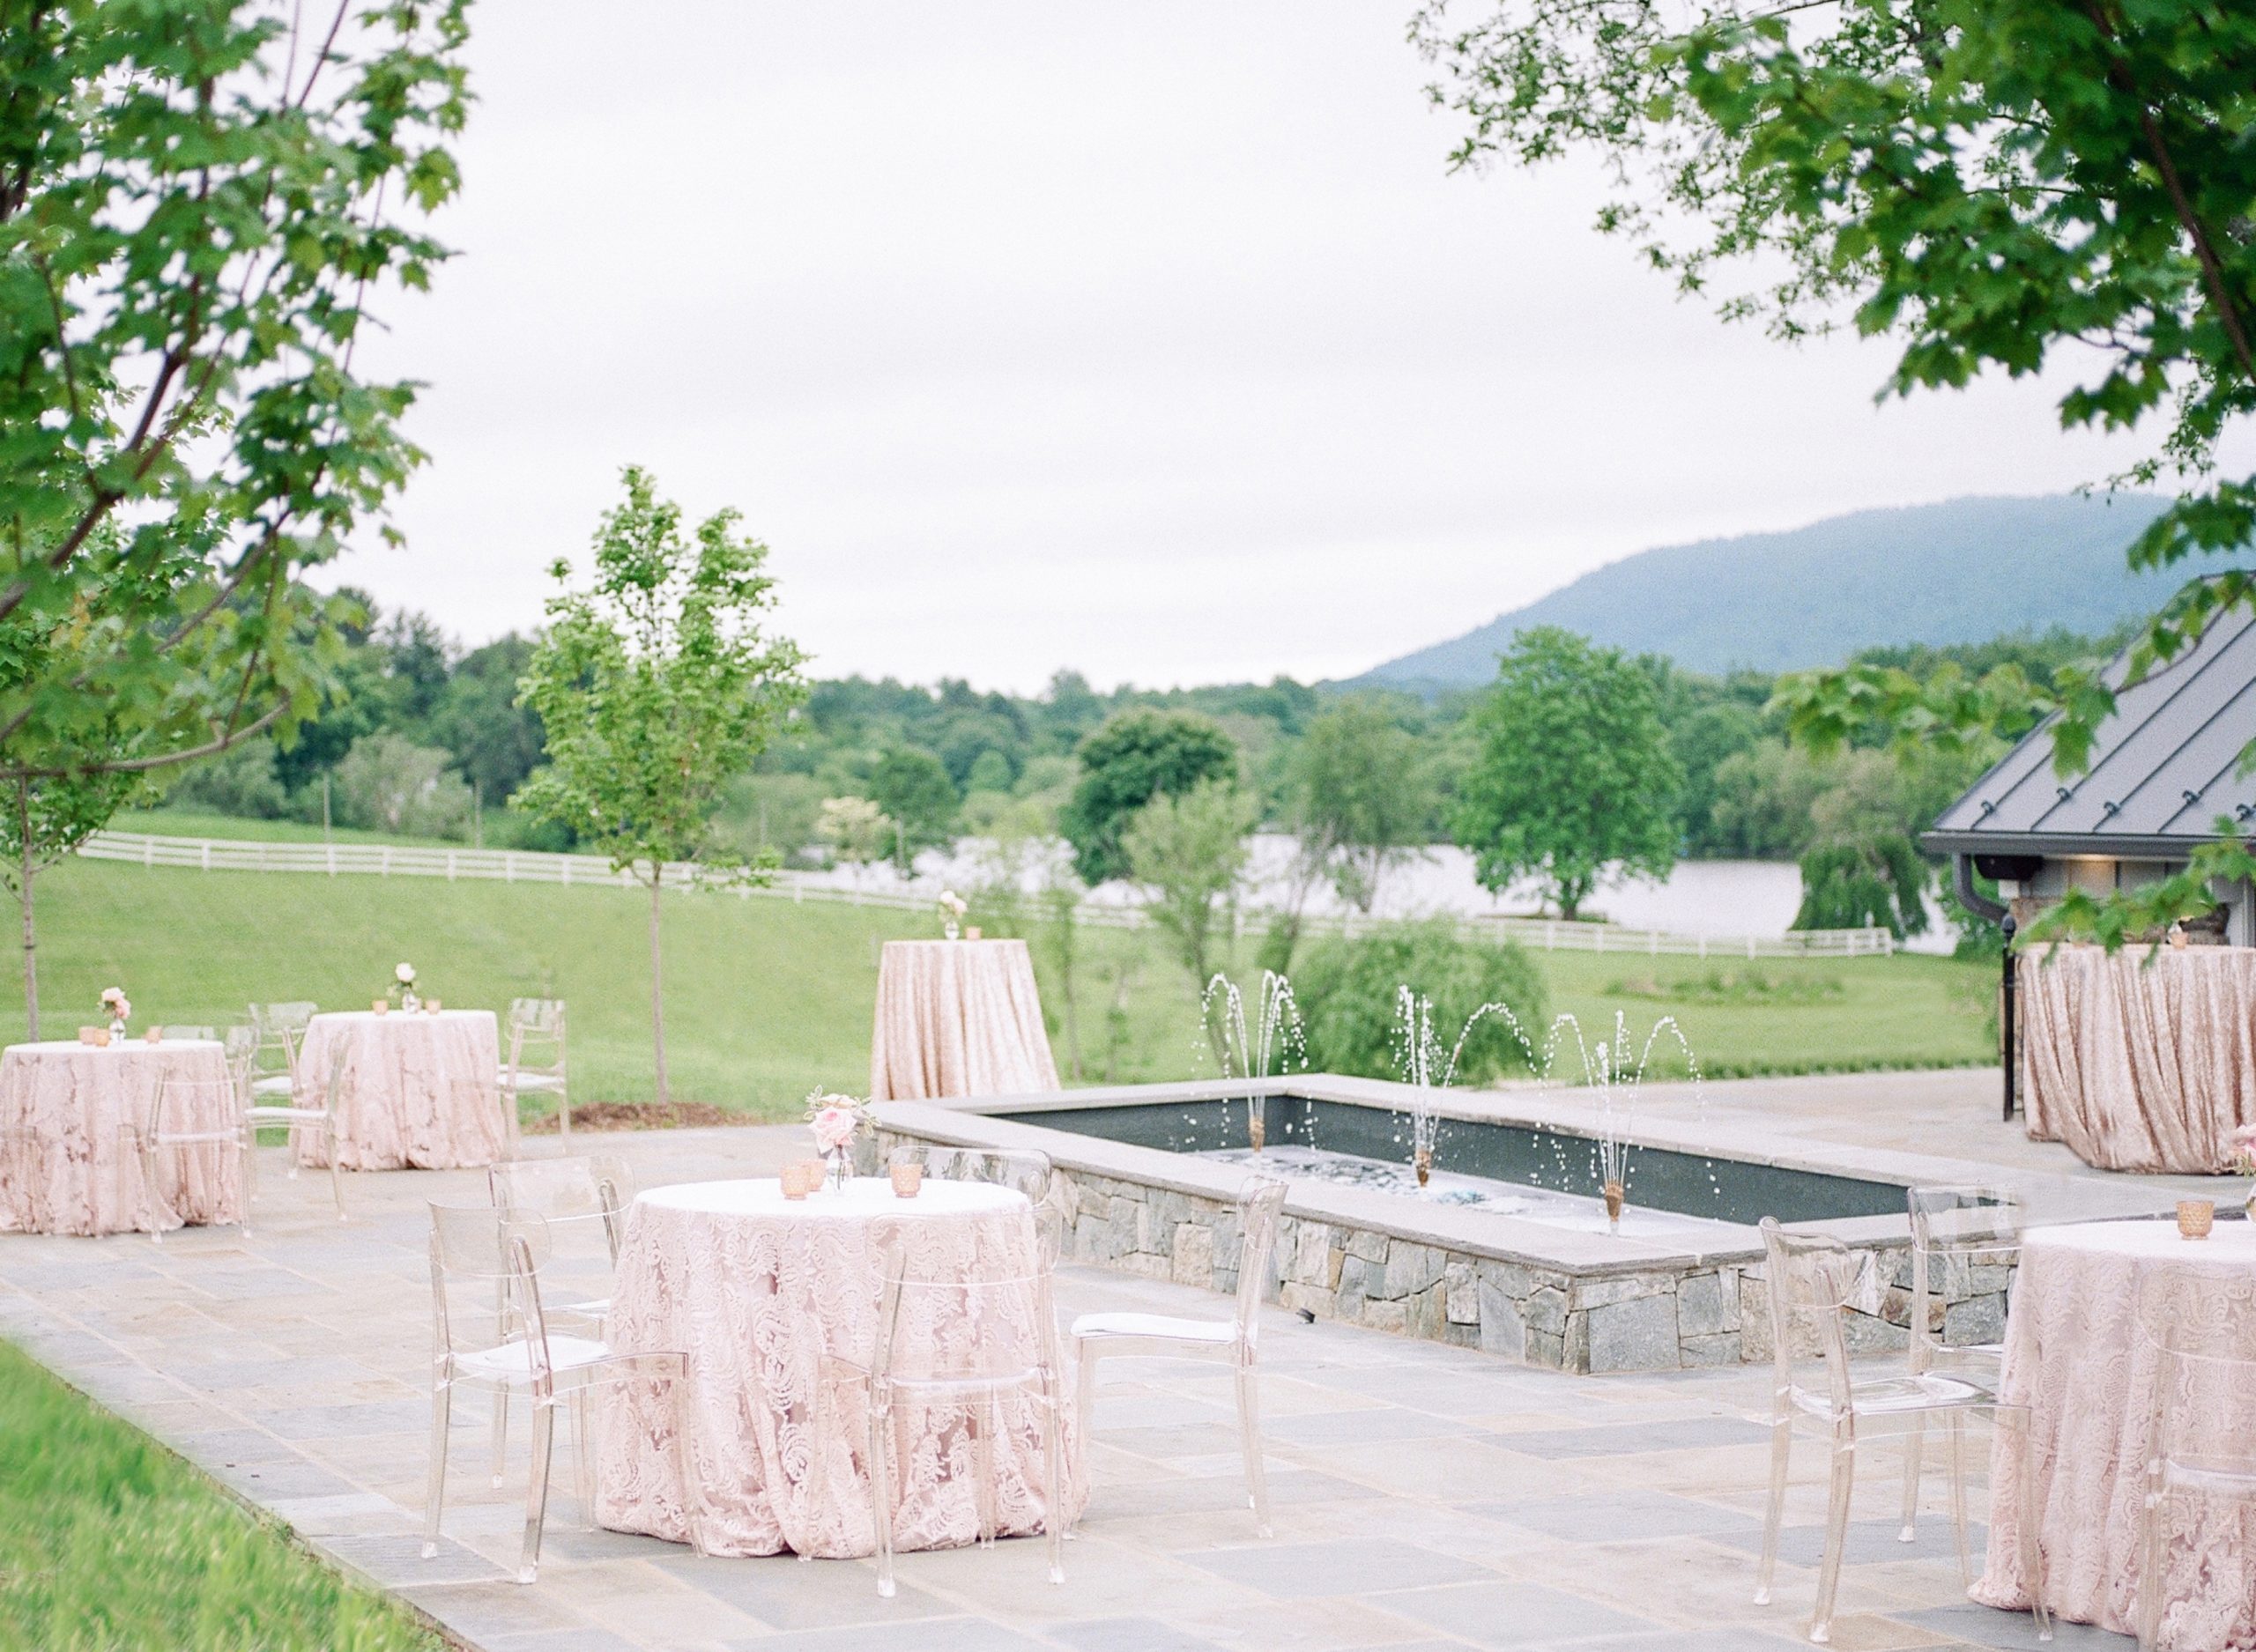 A Casino Night & Rehearsal Dinner recap from a private estate wedding in The Plains, Virginia.